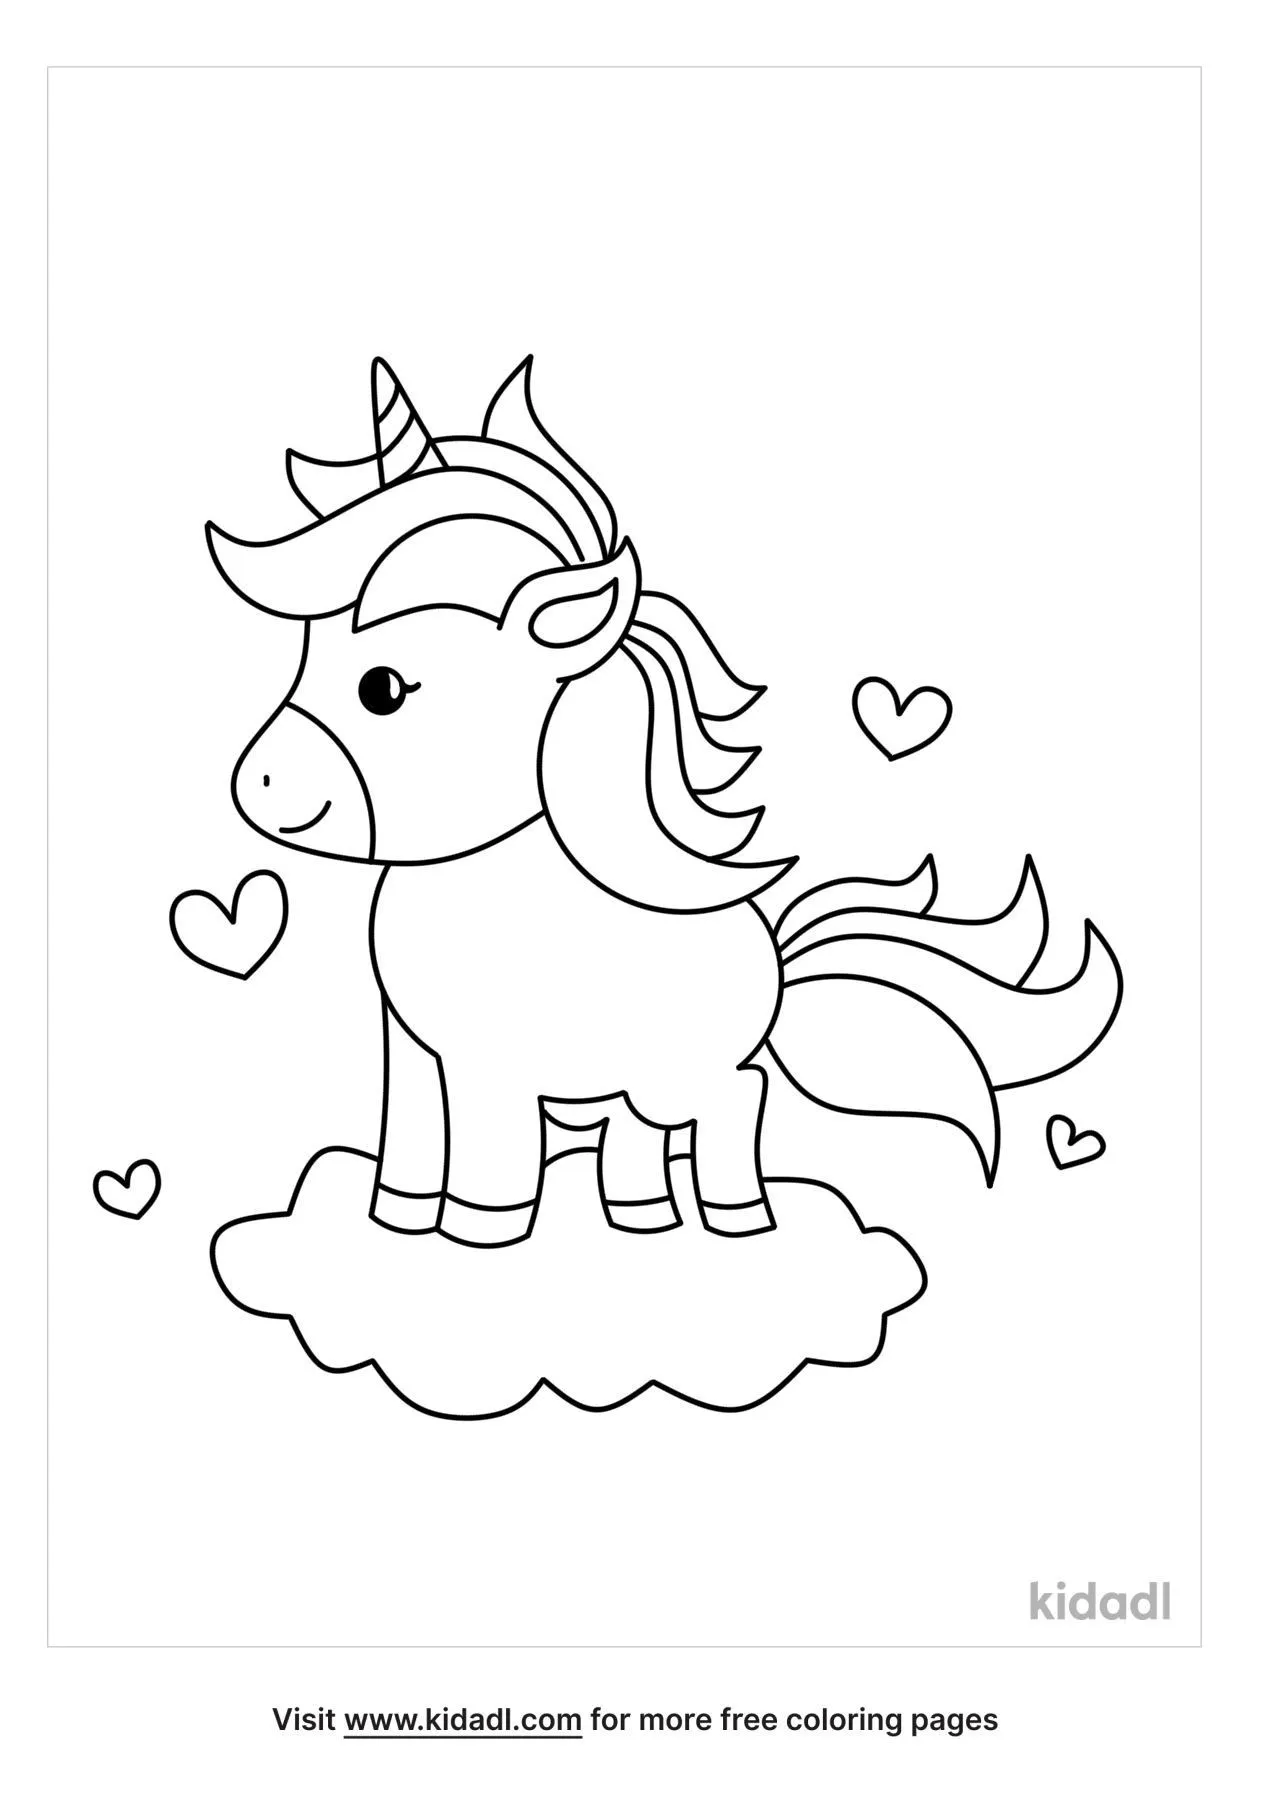 Unicorn On Cloud Coloring Page